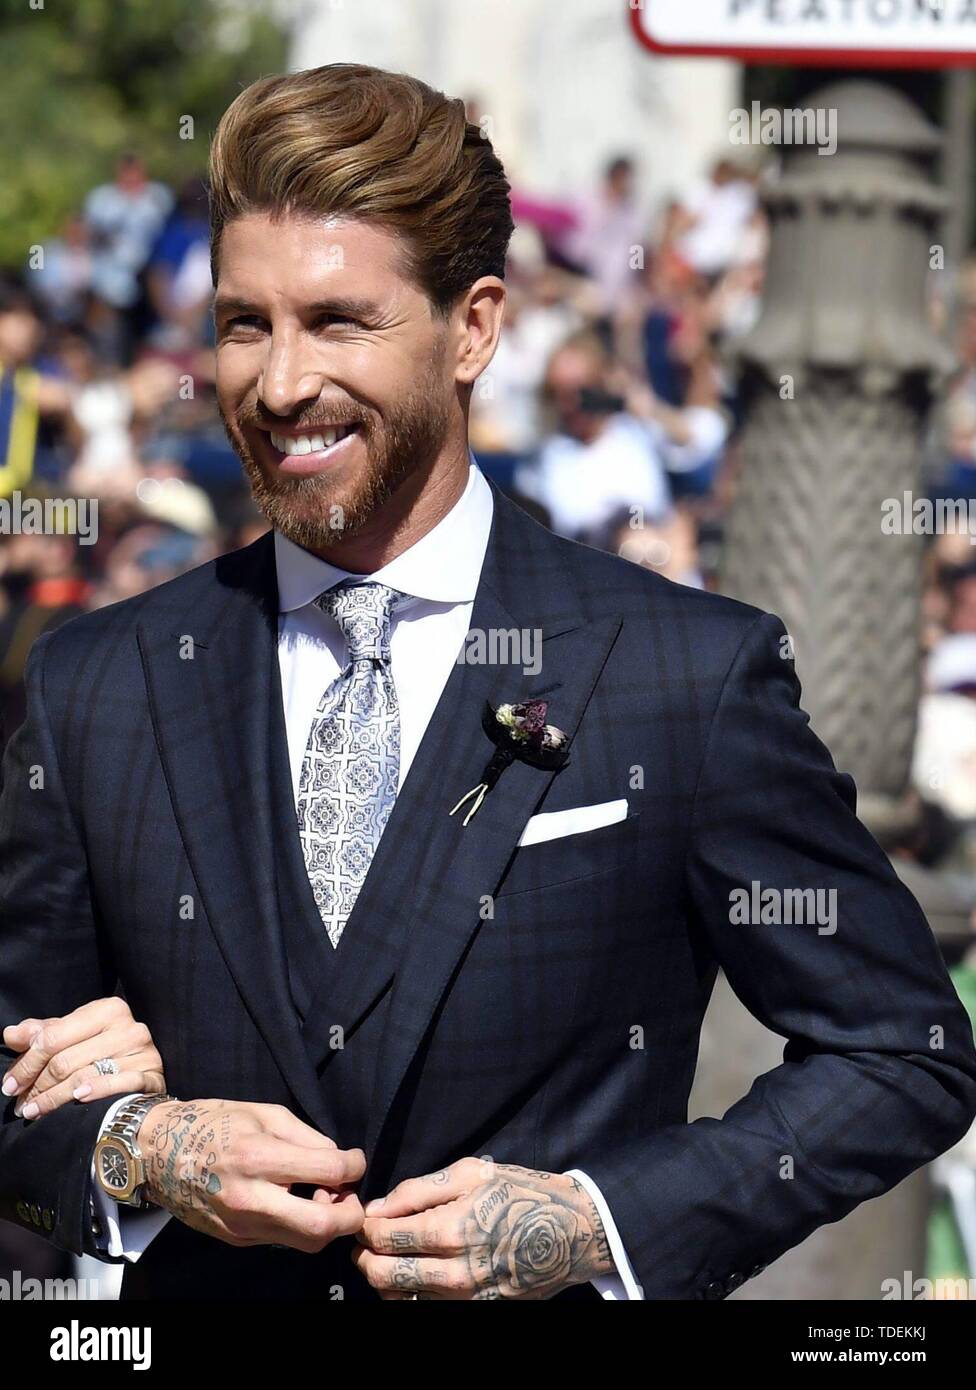 Seville, Spain. 15th June, 2019. Seville, Spain. 15th June, 2019. Soccerplayer Sergio Ramos and mother Paqui Garcia during his wedding with Pilar Rubio in Seville on Saturday, 15 June 2019. Credit: CORDON PRESS/Alamy Live News Credit: CORDON PRESS/Alamy Live News Stock Photo